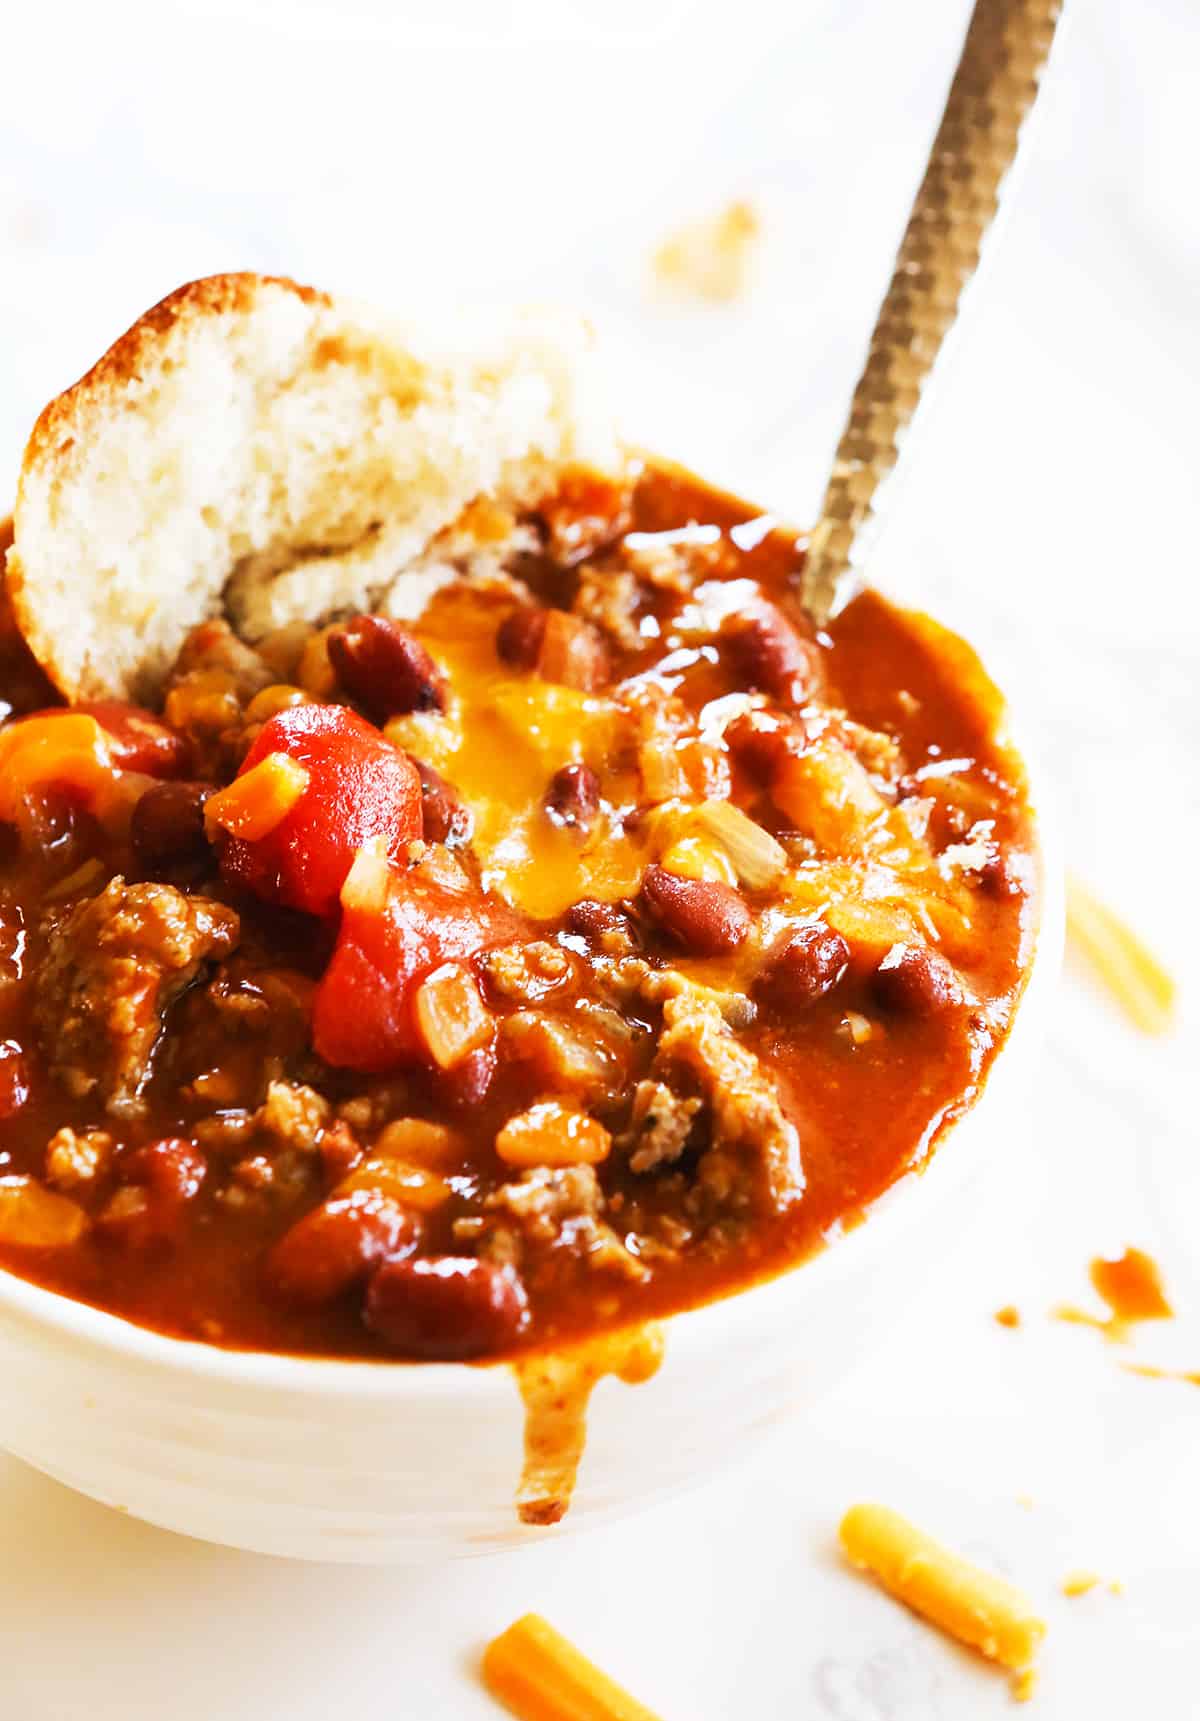 Bowl of chili with melted cheese on top and a piece of bread stuck in the side.